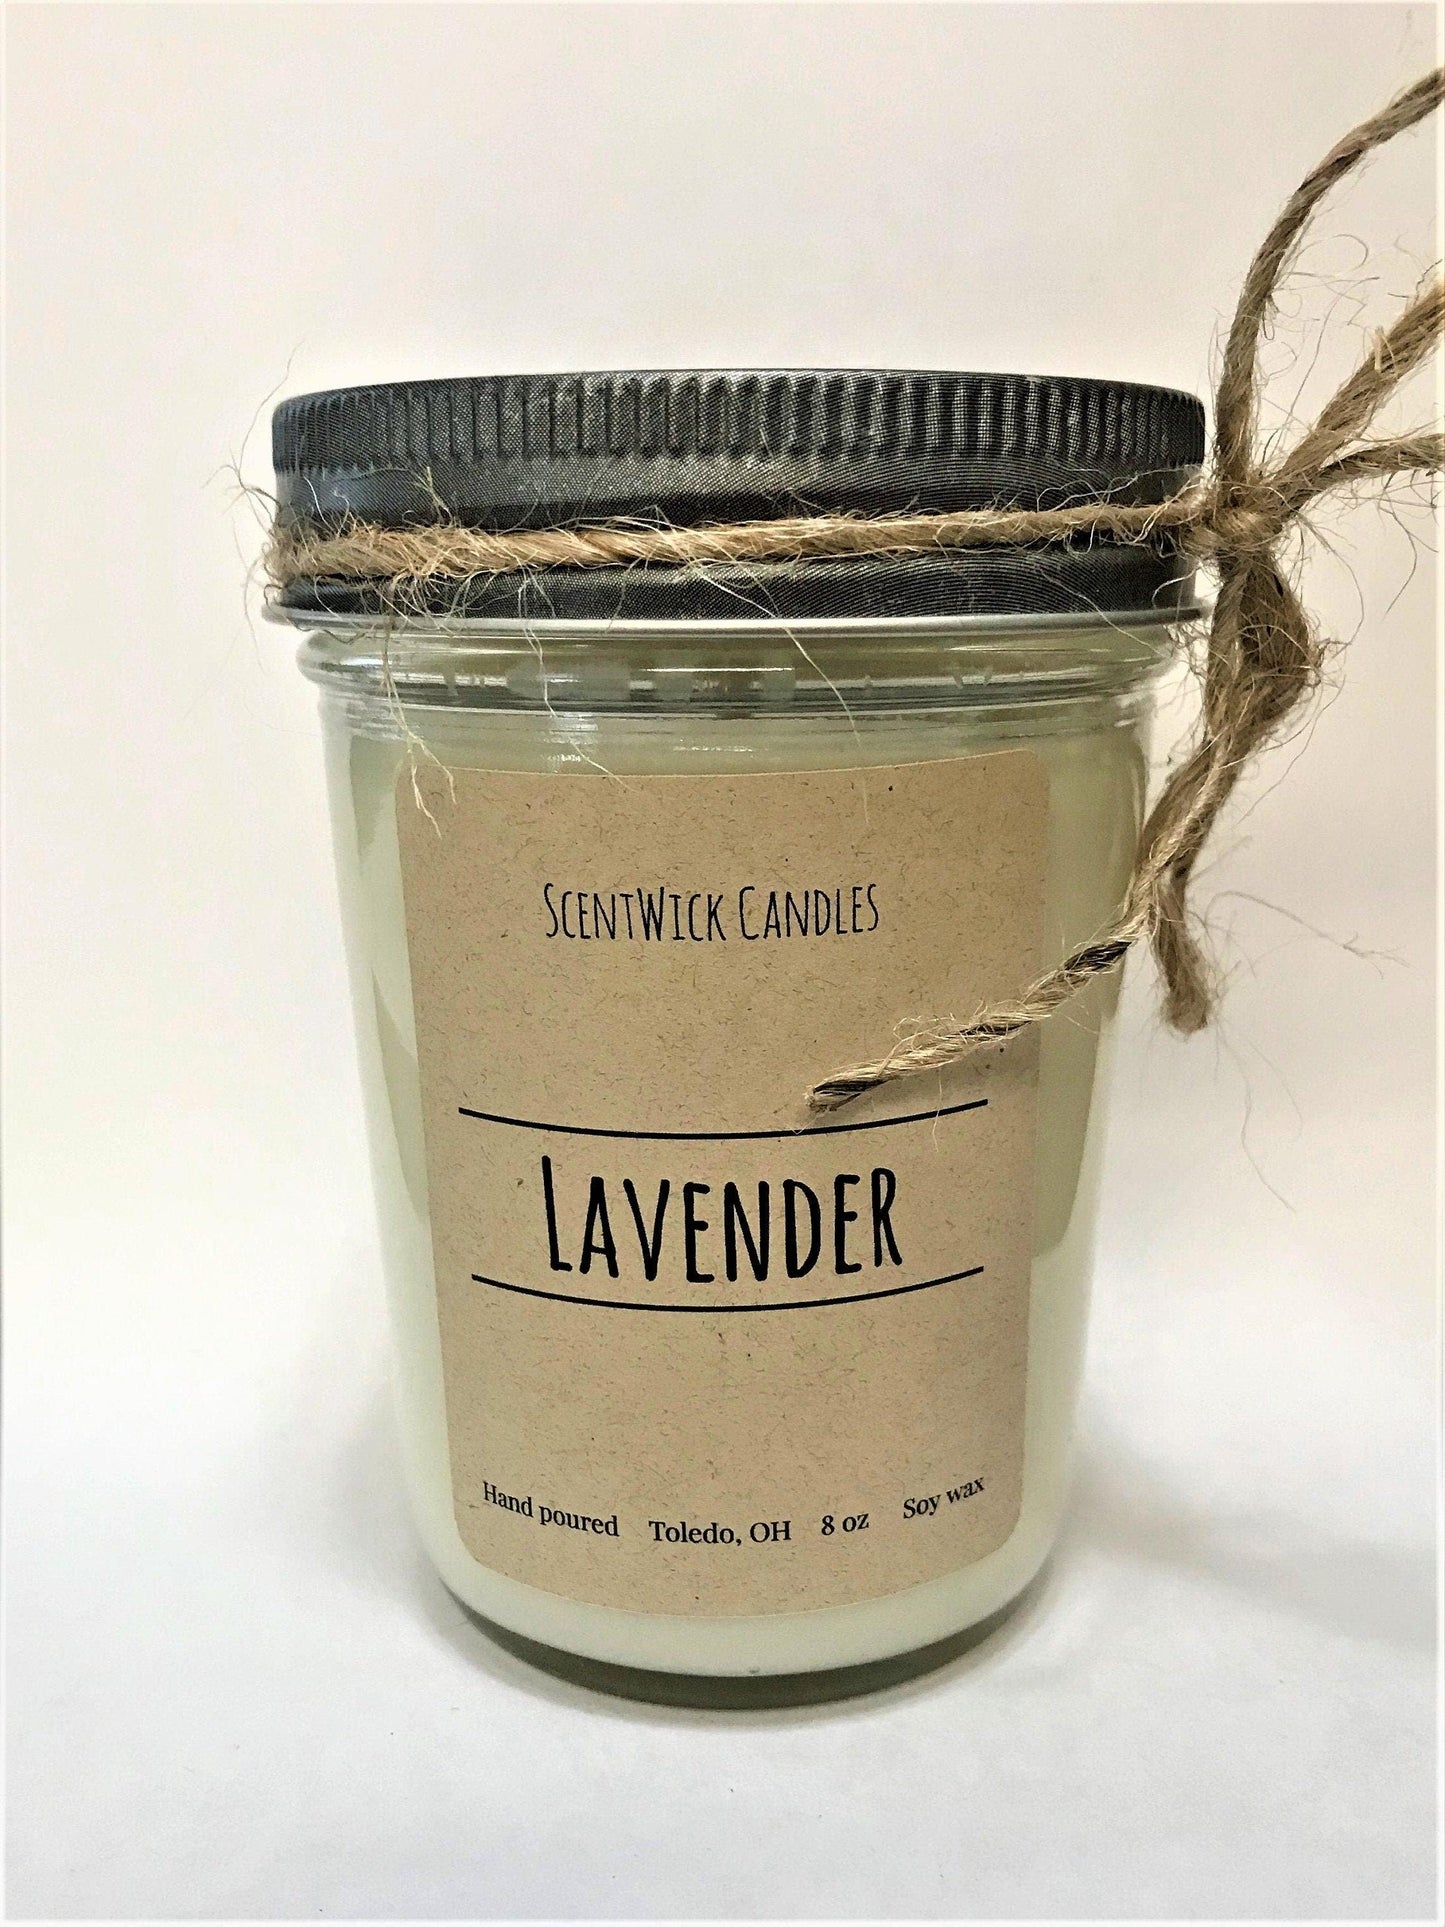 Lavender - ScentWick Candles